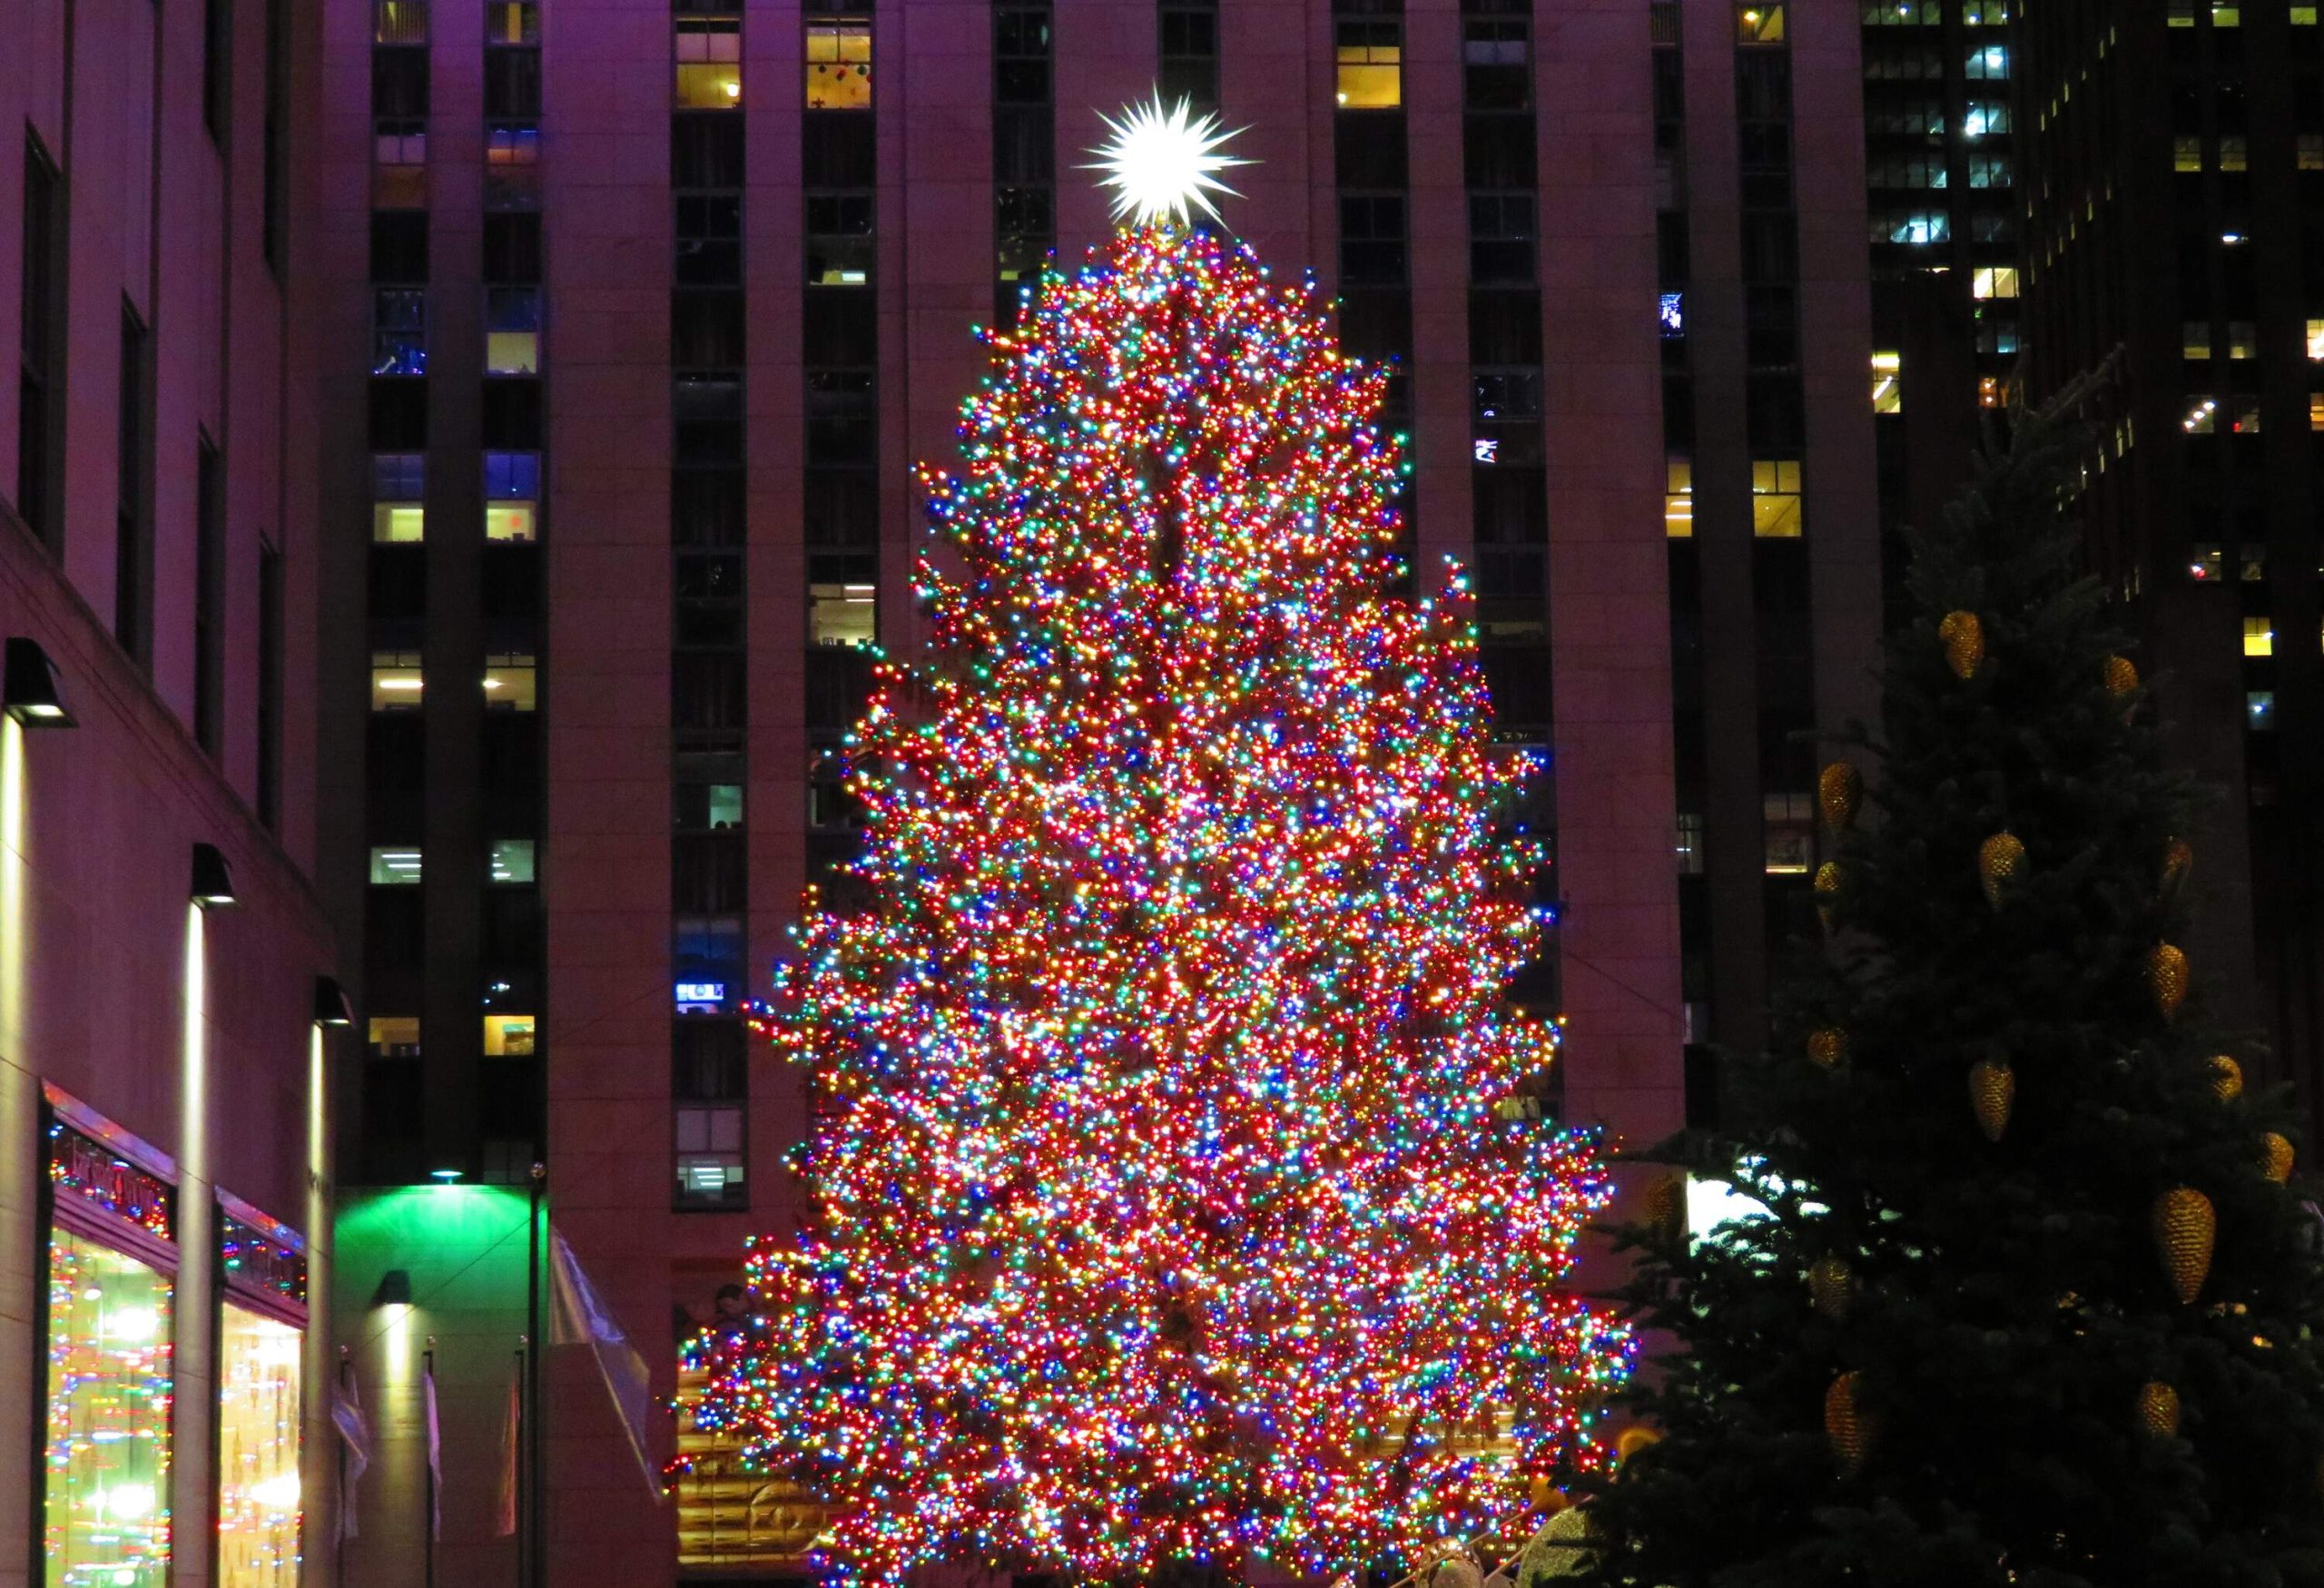 A tall Christmas tree surrounded by tall buildings is brightly lit with colourful LED lights.